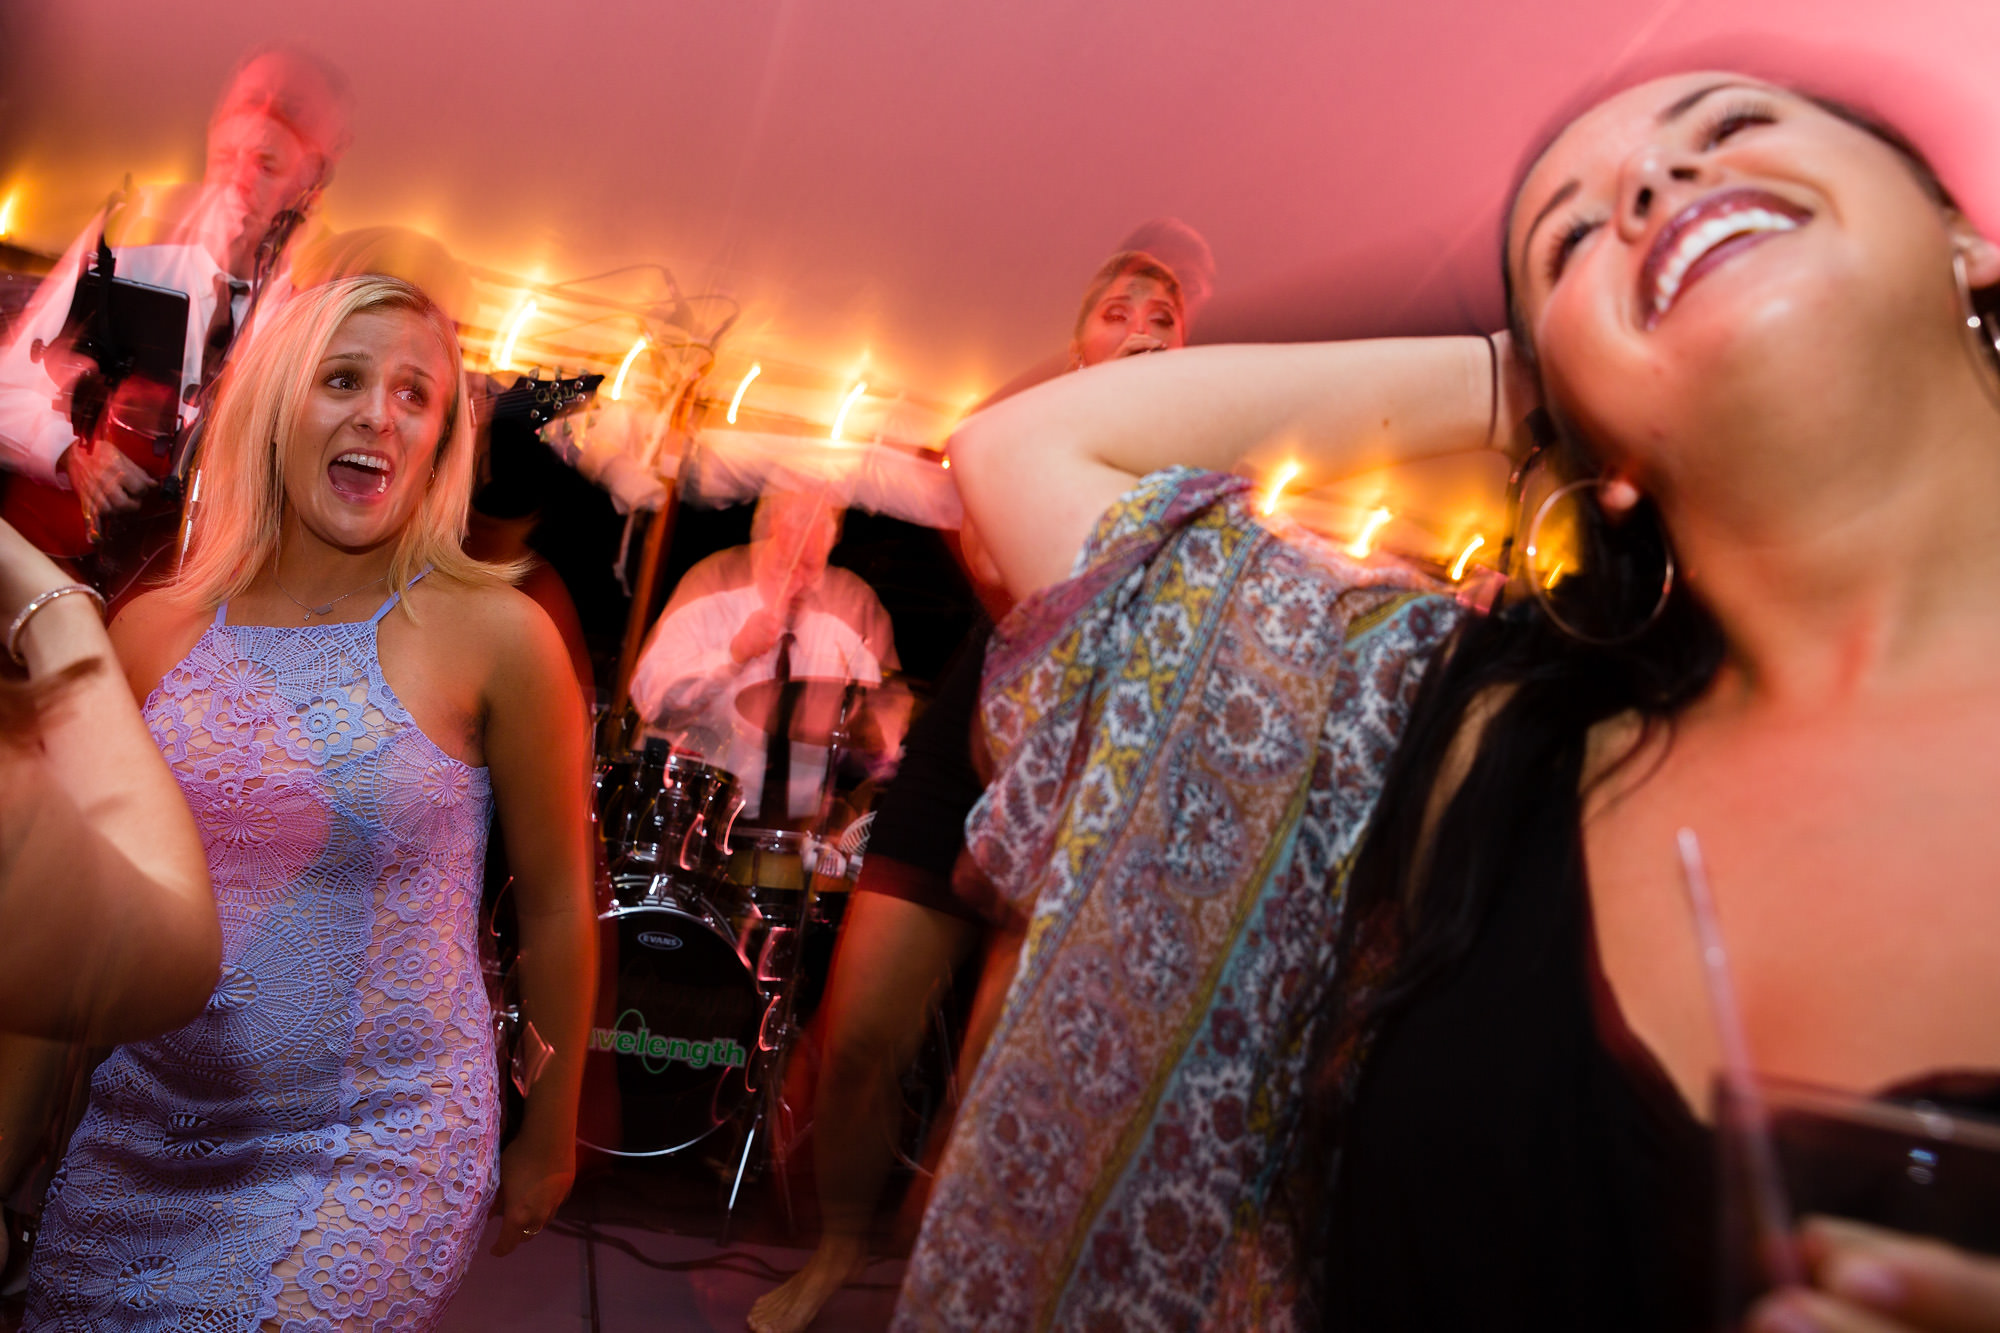 Wavelength kept the wedding floor packed and energetic at this New Hampshire wedding